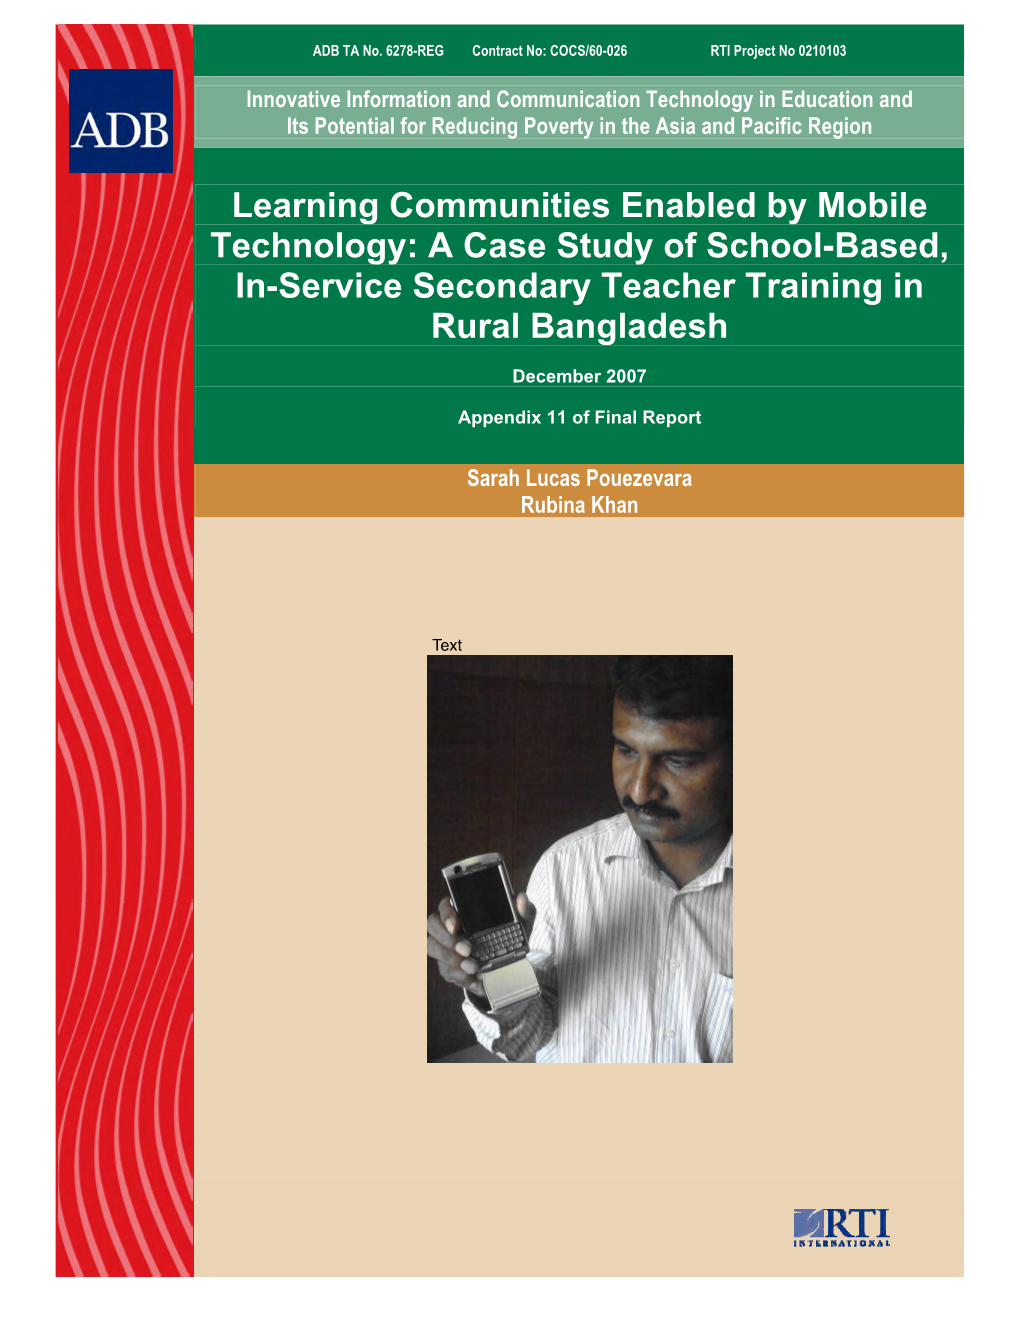 Learning Communities Enabled by Mobile Technology: a Case Study of School-Based, In-Service Secondary Teacher Training in Rural Bangladesh